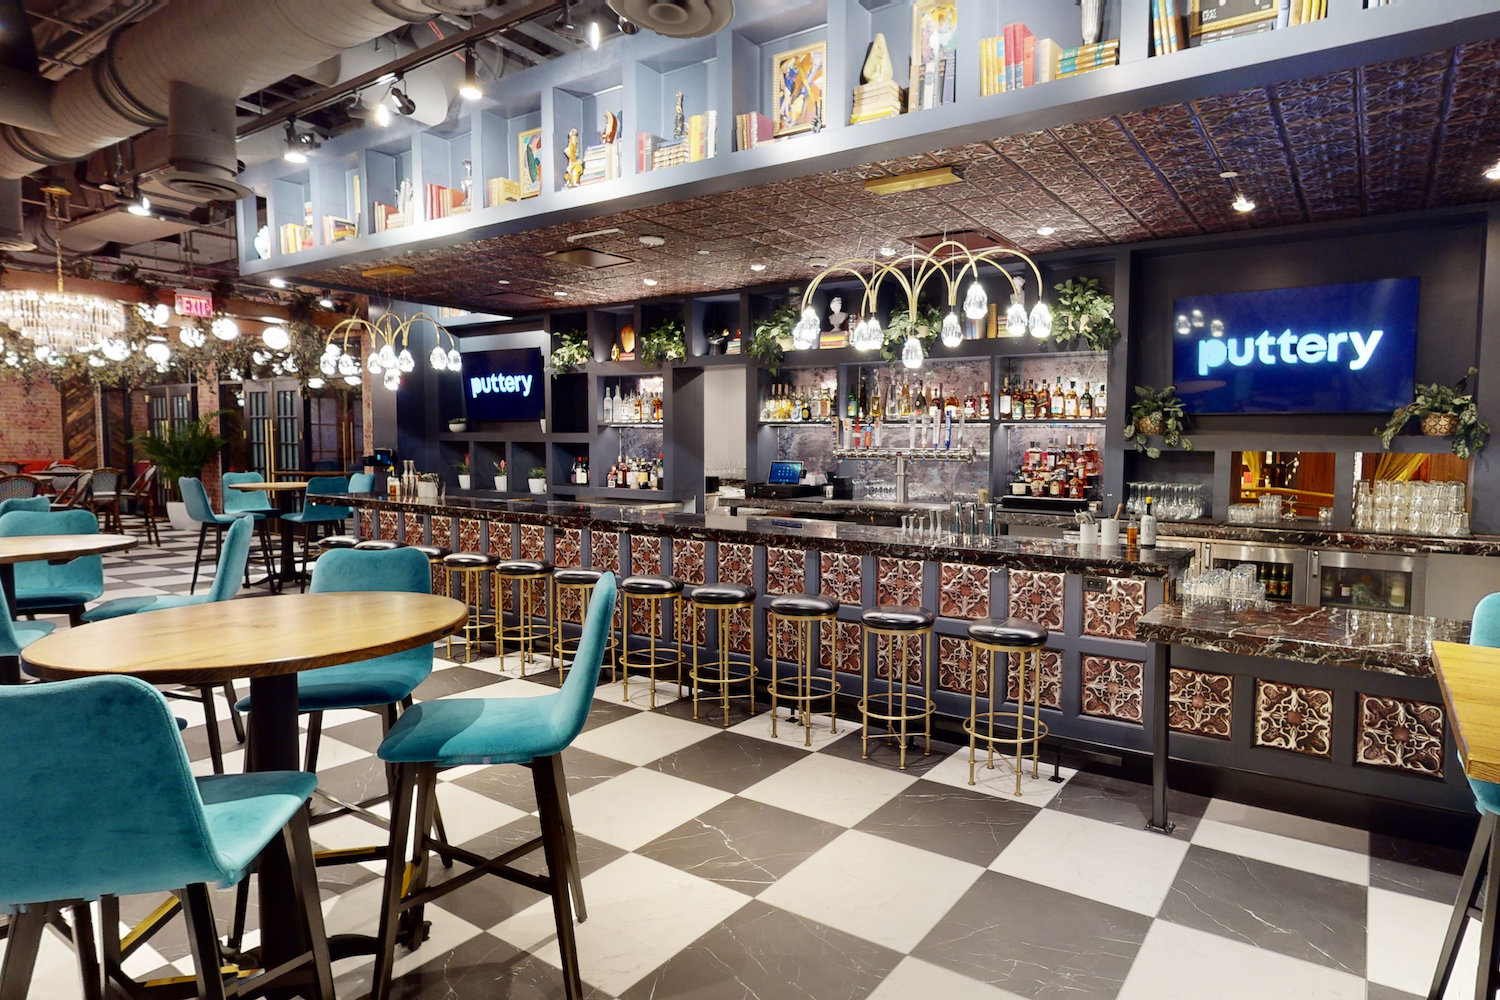 bar with two TVs, chandeliers, books, tables with teal chairs